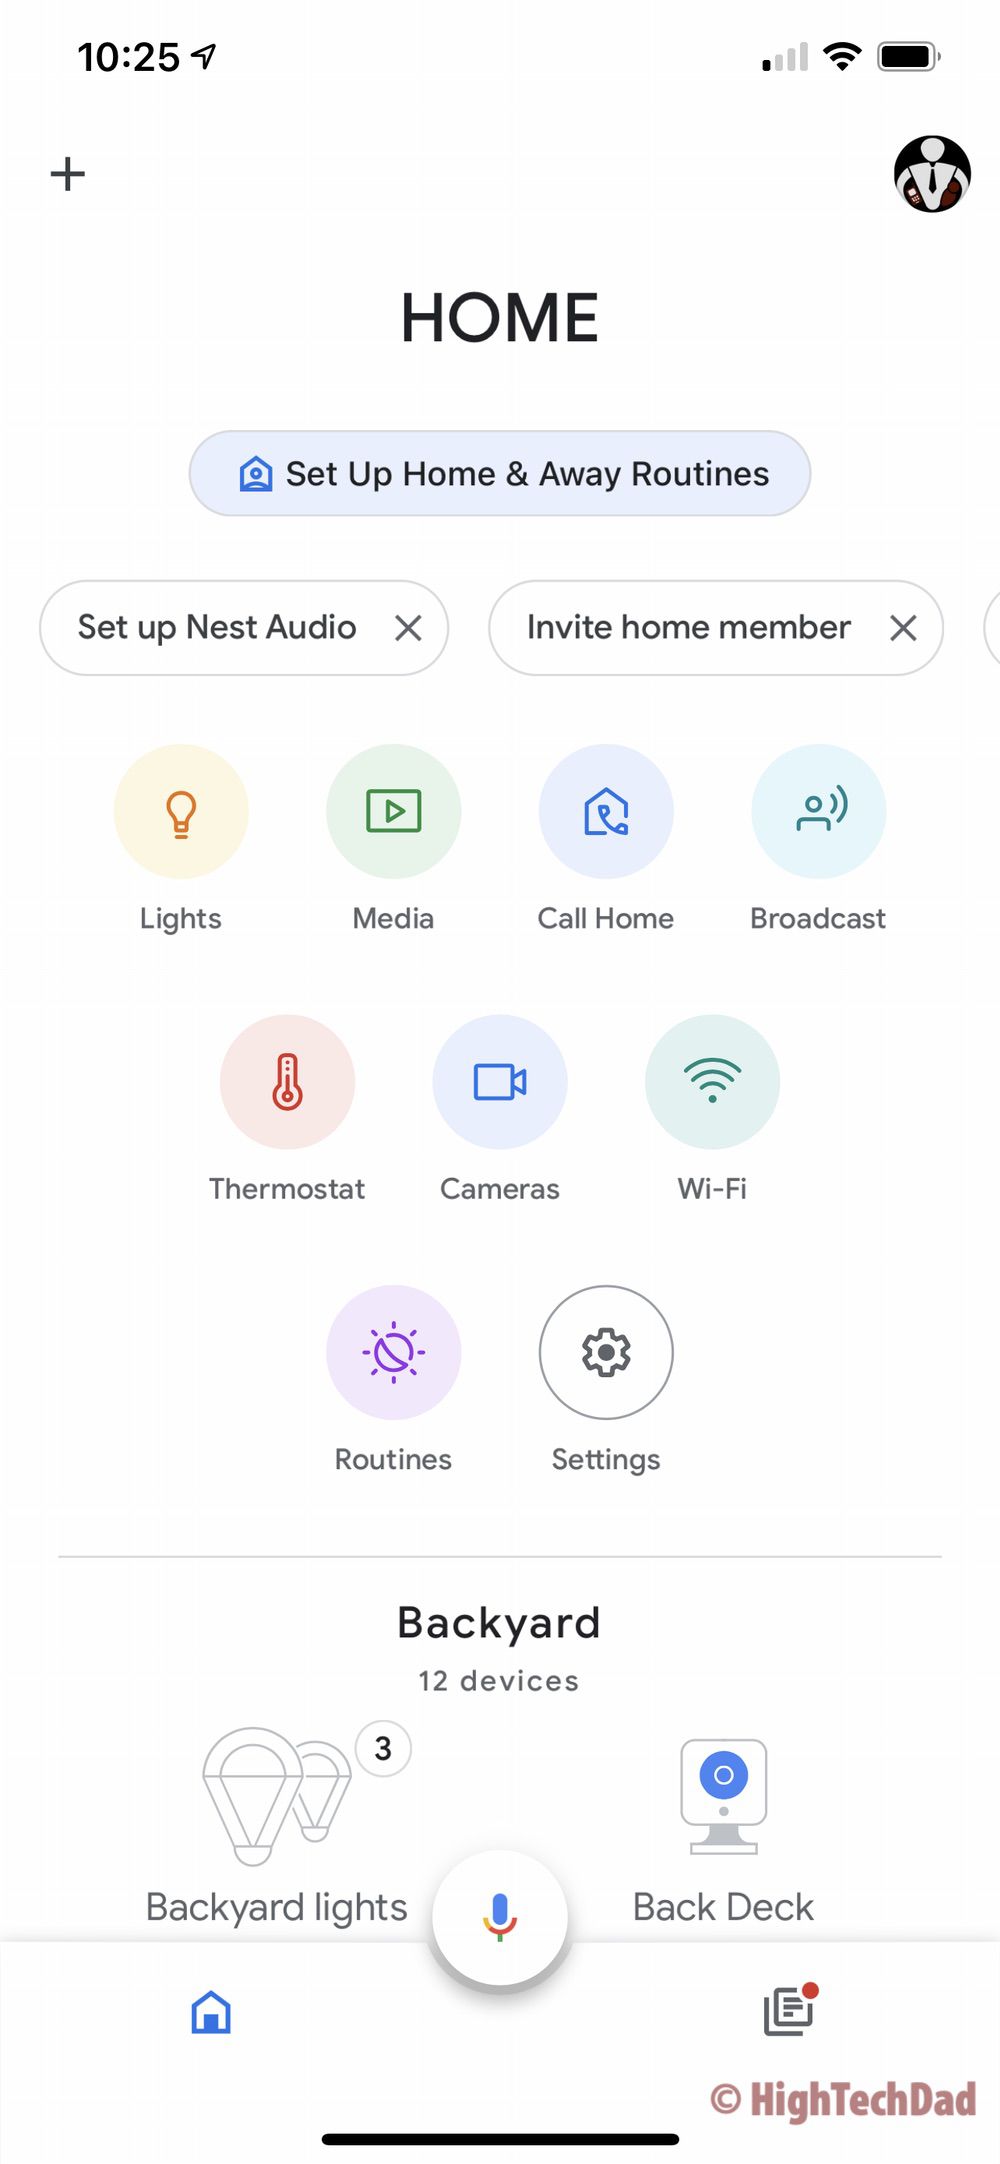 What cameras fully integrate with the Google Home app